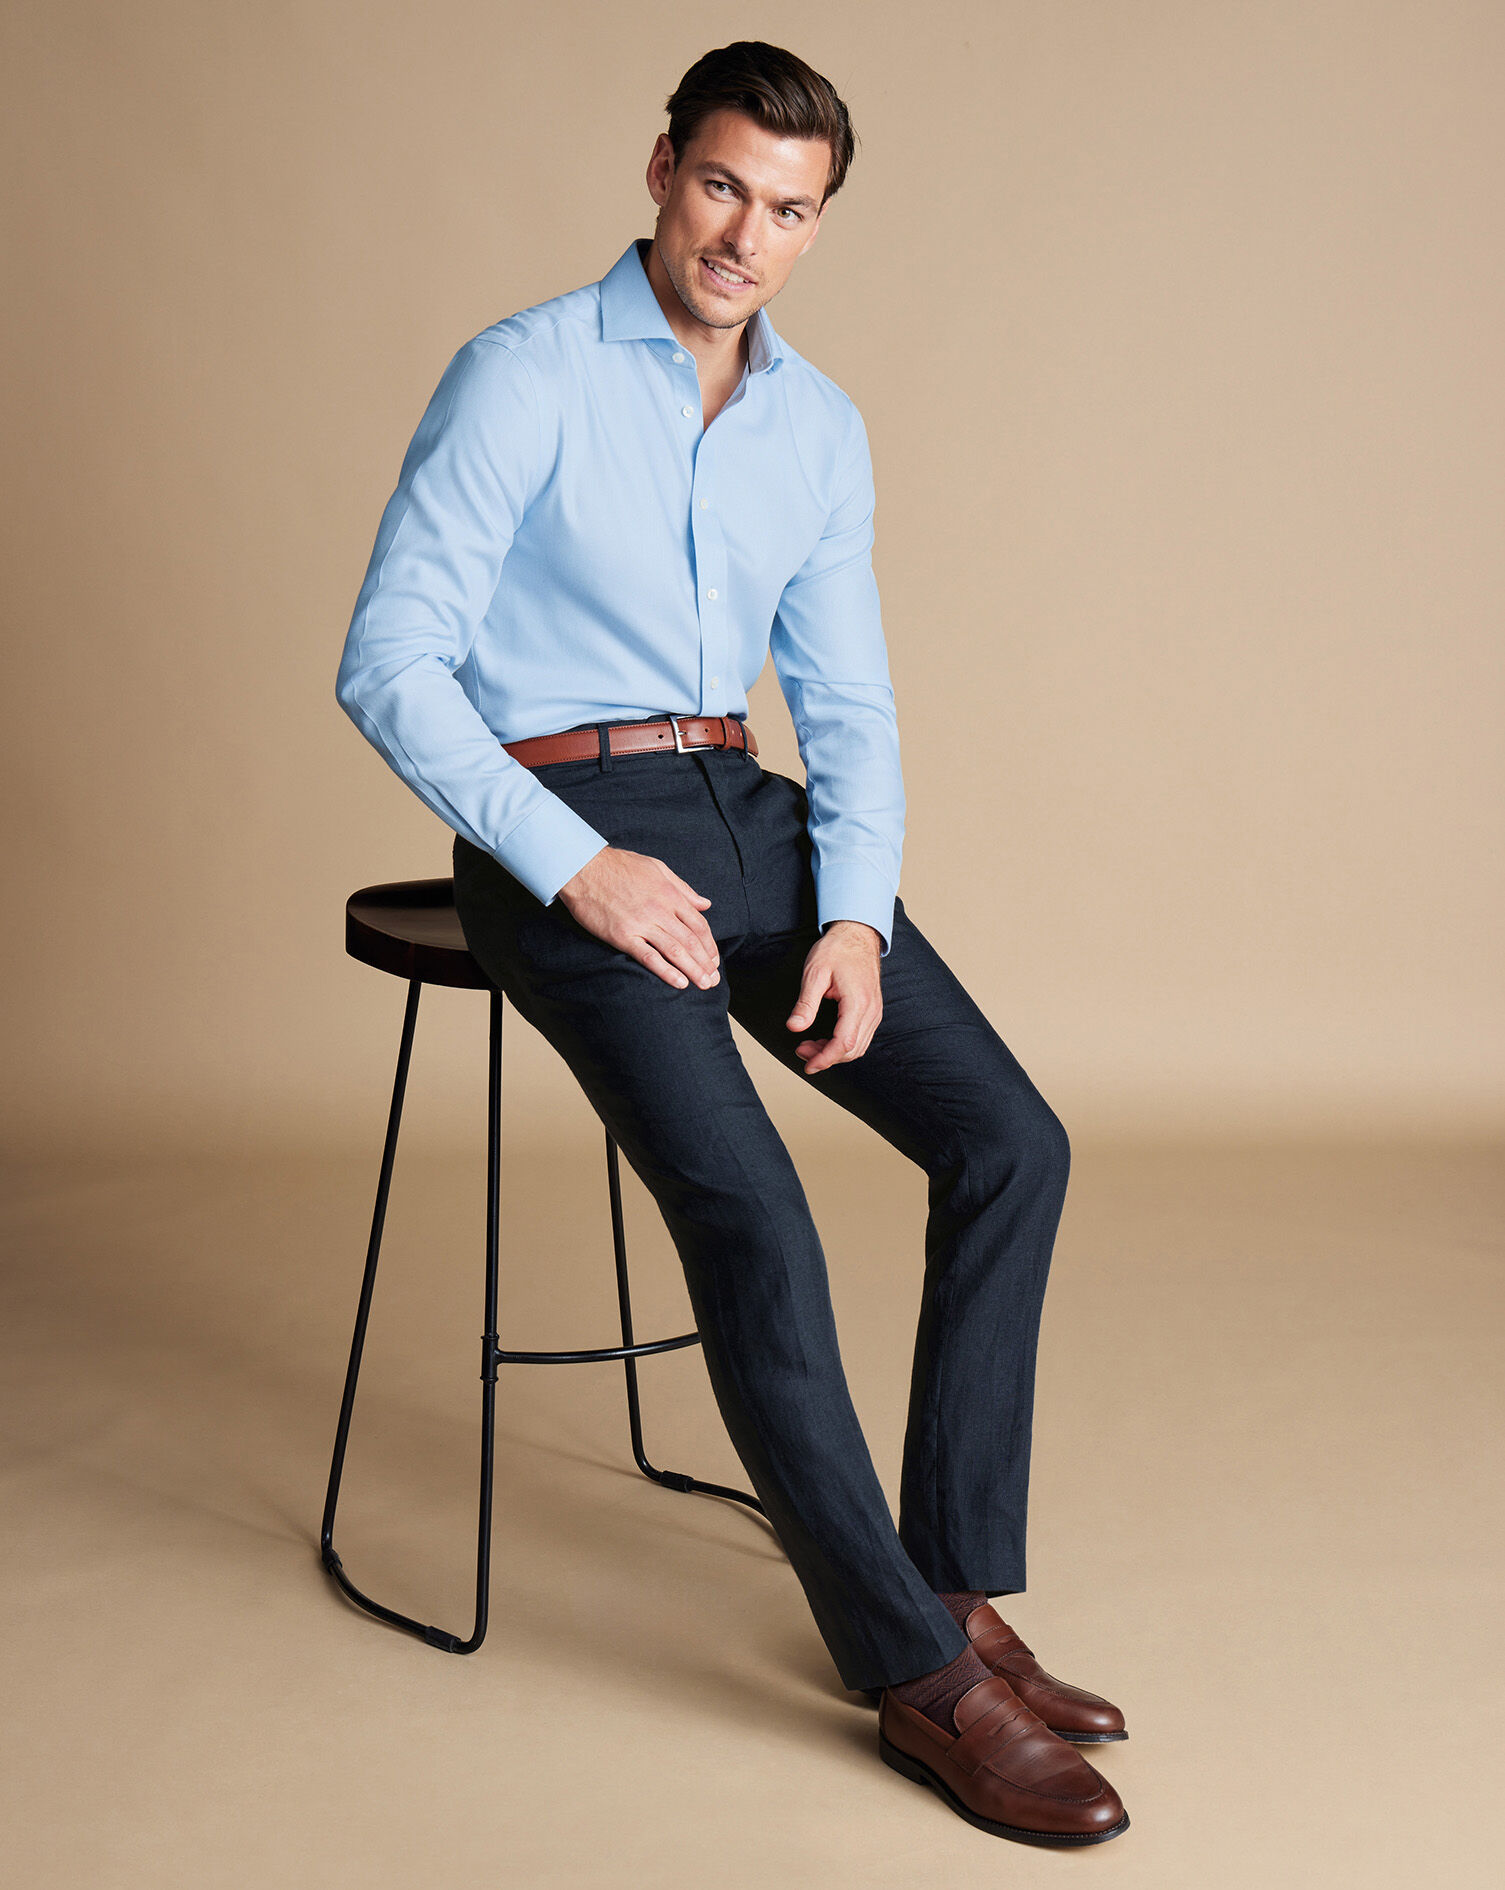 What Color Shirt to Wear with Navy Blue Pants: 30 Colors | Blue pants, Navy  blue pants, Light blue shirts